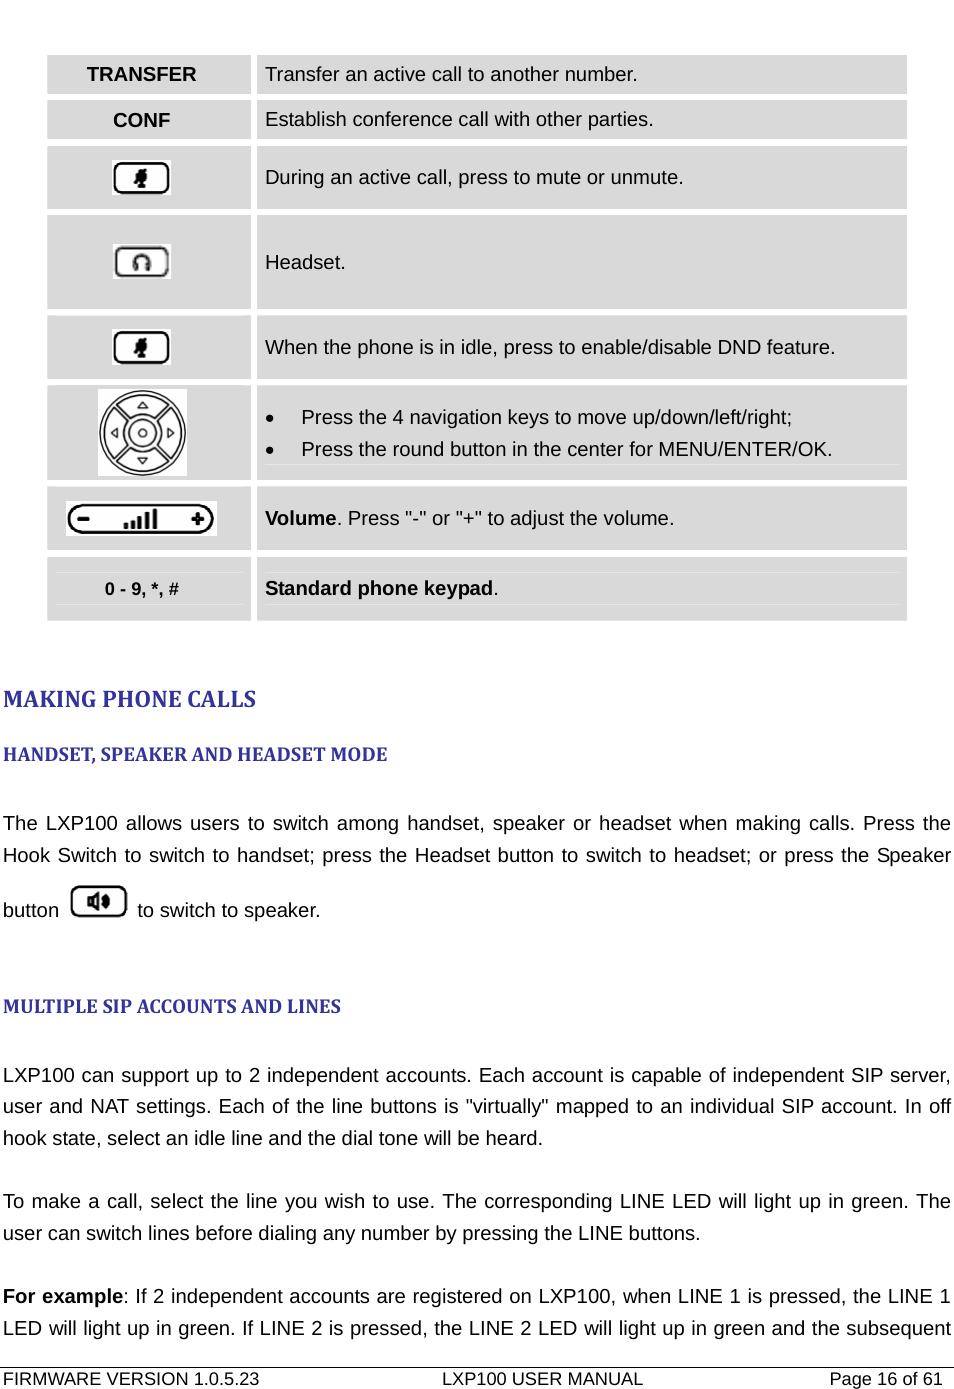   FIRMWARE VERSION 1.0.5.23                    LXP100 USER MANUAL                  Page 16 of 61                                   TRANSFER Transfer an active call to another number. CONF Establish conference call with other parties.  During an active call, press to mute or unmute.  Headset.  When the phone is in idle, press to enable/disable DND feature.  •  Press the 4 navigation keys to move up/down/left/right; •  Press the round button in the center for MENU/ENTER/OK.  Volume. Press &quot;-&quot; or &quot;+&quot; to adjust the volume. 0 - 9, *, #  Standard phone keypad.  MAKINGPHONECALLSHANDSET,SPEAKERANDHEADSETMODE The LXP100 allows users to switch among handset, speaker or headset when making calls. Press the Hook Switch to switch to handset; press the Headset button to switch to headset; or press the Speaker button    to switch to speaker.  MULTIPLESIPACCOUNTSANDLINES LXP100 can support up to 2 independent accounts. Each account is capable of independent SIP server, user and NAT settings. Each of the line buttons is &quot;virtually&quot; mapped to an individual SIP account. In off hook state, select an idle line and the dial tone will be heard.   To make a call, select the line you wish to use. The corresponding LINE LED will light up in green. The user can switch lines before dialing any number by pressing the LINE buttons.  For example: If 2 independent accounts are registered on LXP100, when LINE 1 is pressed, the LINE 1 LED will light up in green. If LINE 2 is pressed, the LINE 2 LED will light up in green and the subsequent 